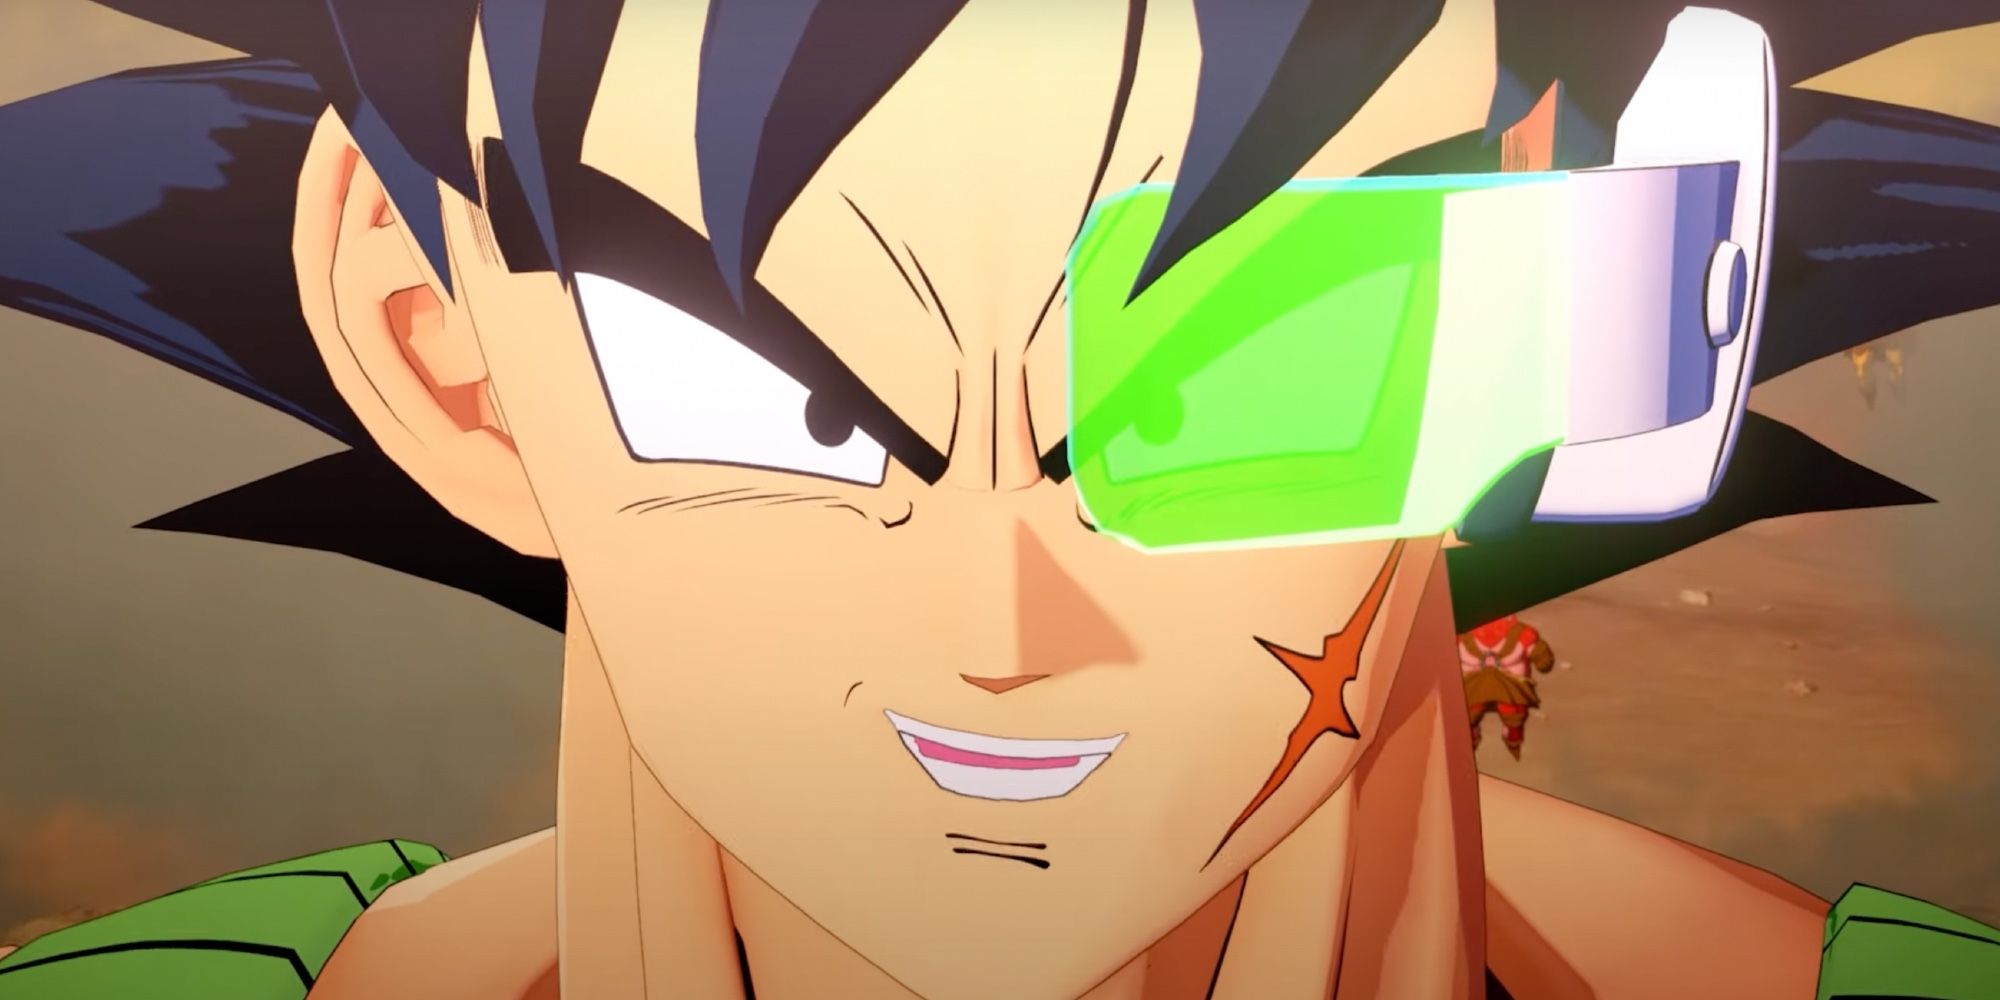 A close shot of Bardock's face, smiling while looking at you.